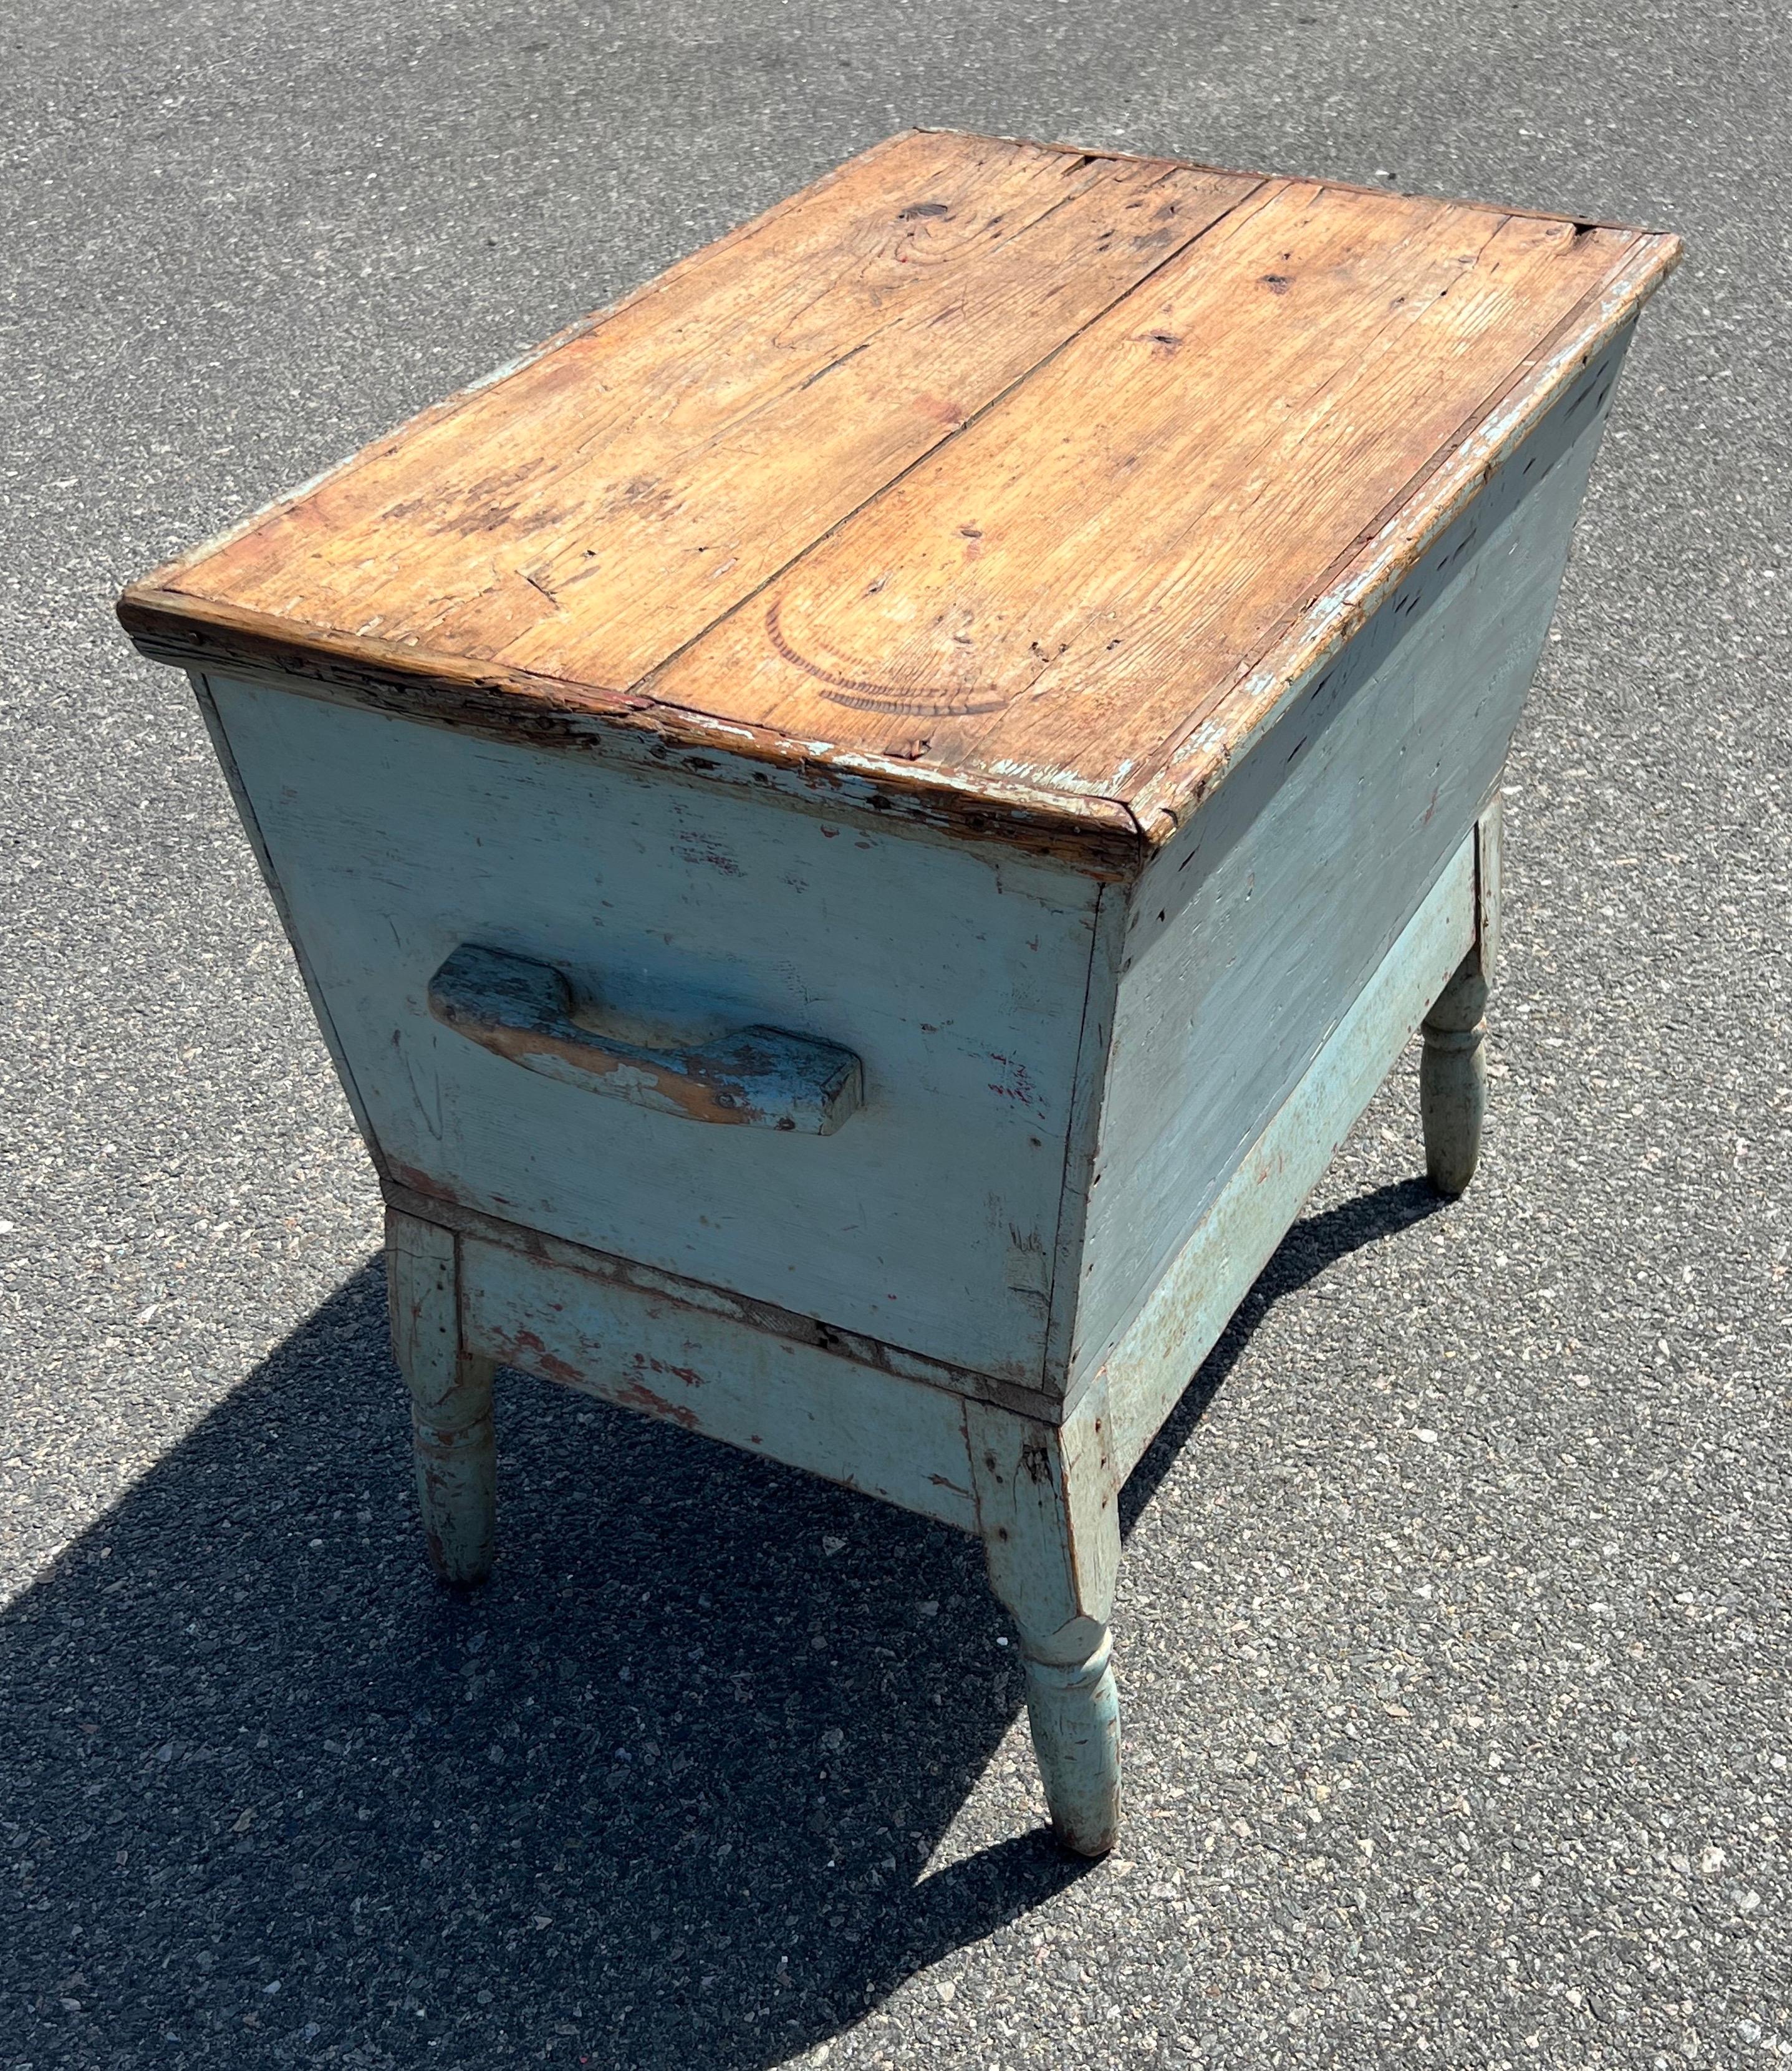 19th century dough box with natural, two-board lift top. Original light blue painted base with side handles and turned, splayed legs.